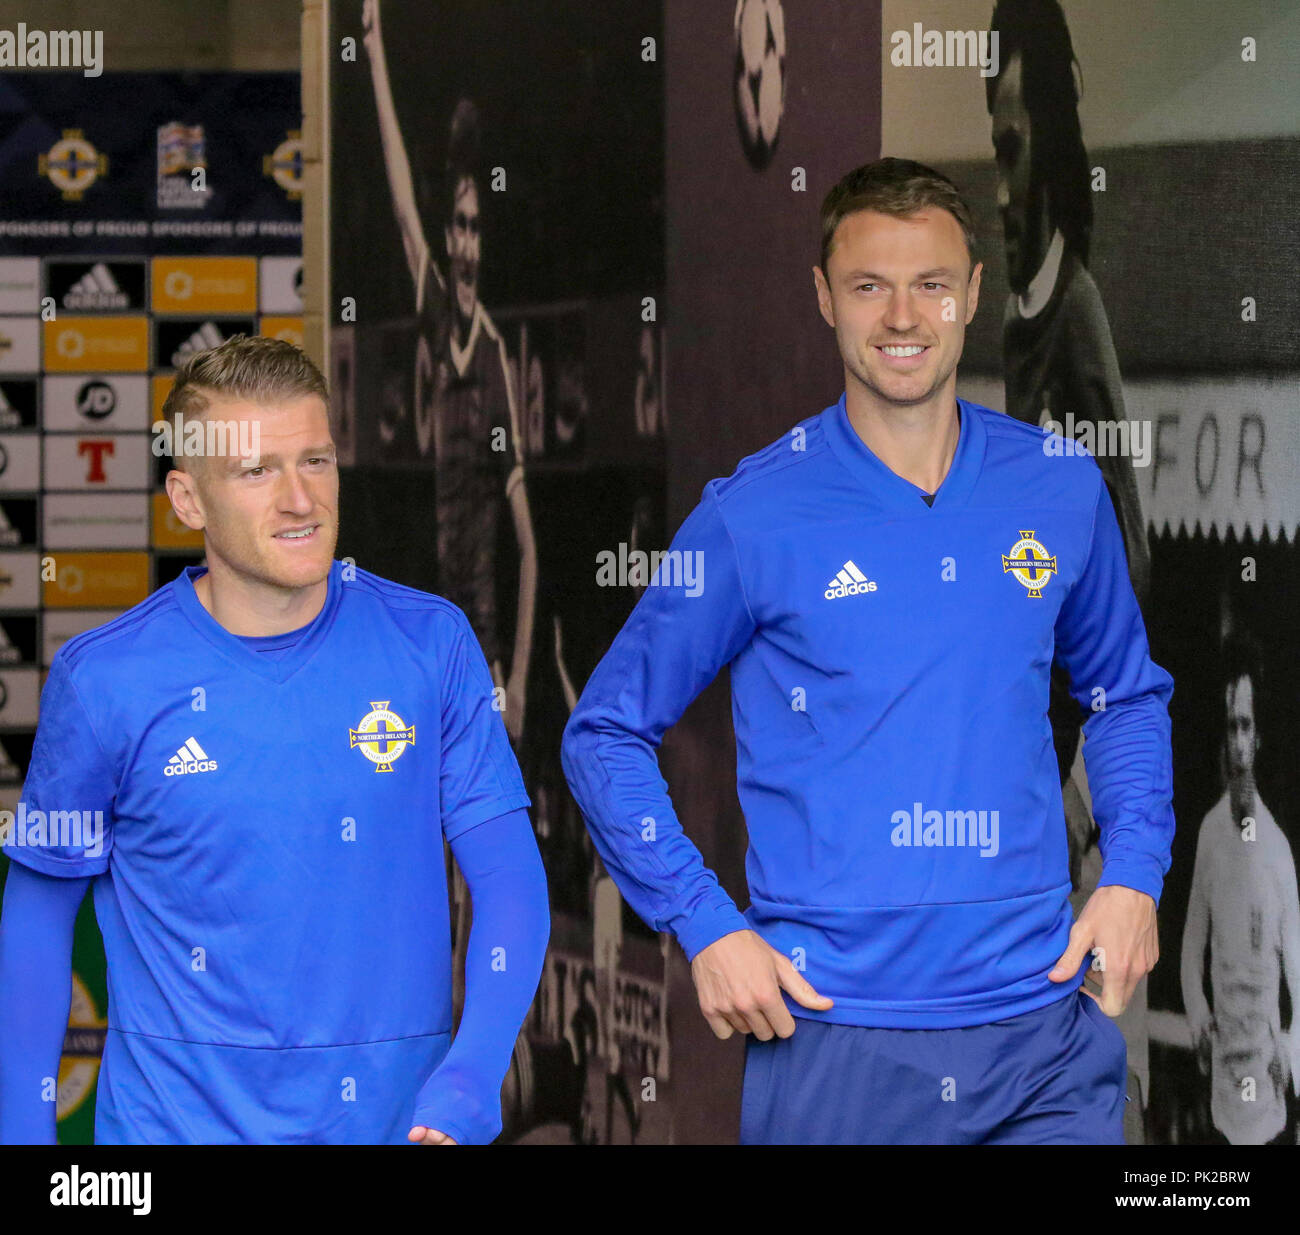 Windsor Park, Belfast, Northern Ireland. 10 September 2018. After Saturday's defeat in the UEFA Nations League, Northern Ireland returned to training this morning at Windsor Park. Tomorrow night they play Israel in a friendly international. Steven Davis (left) and Jonny Evans. Credit: David Hunter/Alamy Live News. Stock Photo